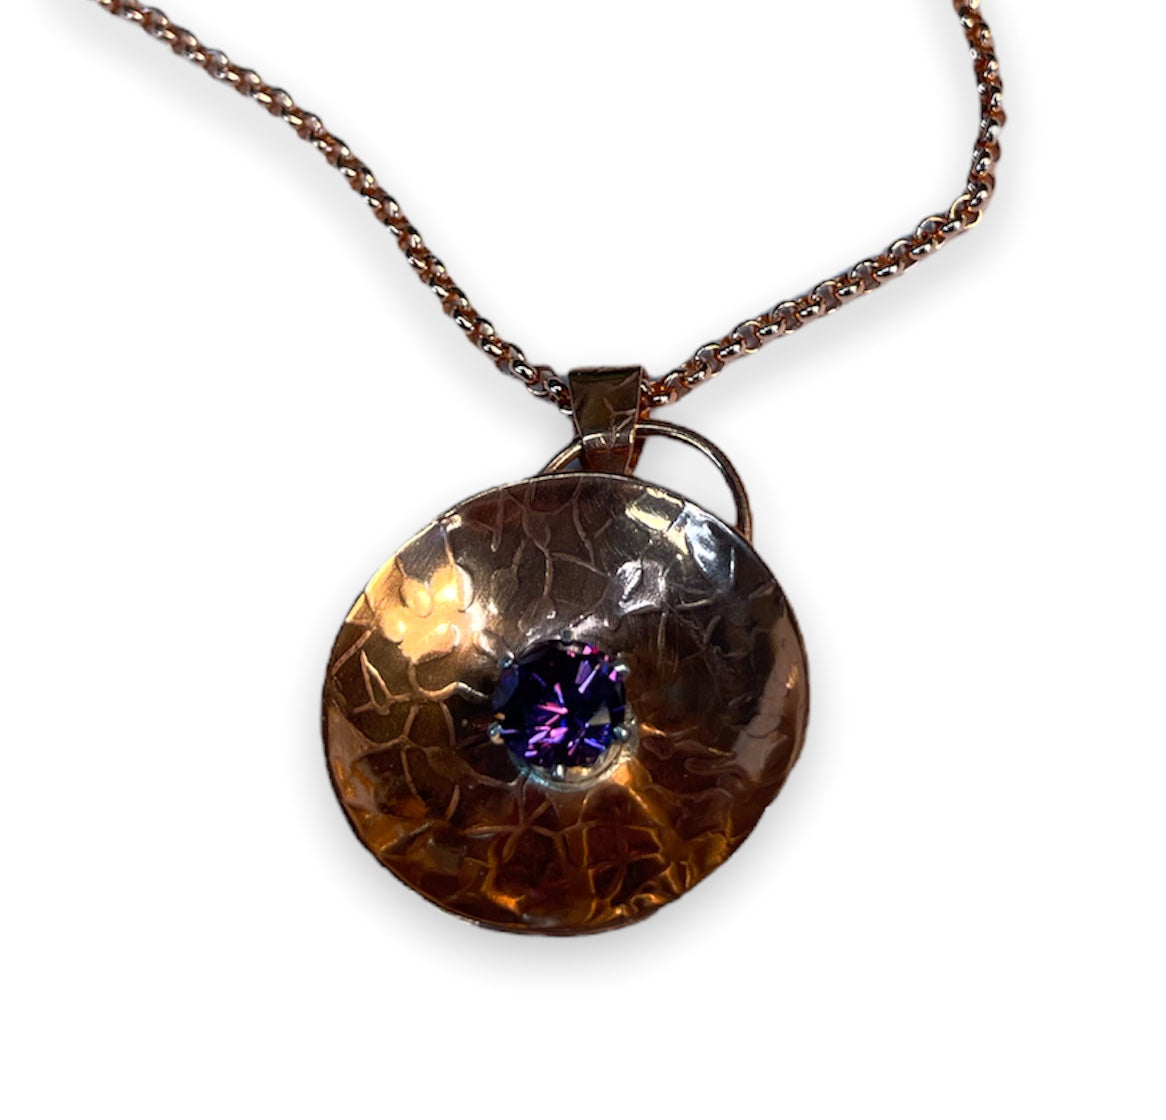 Copper orb necklace with amethyst